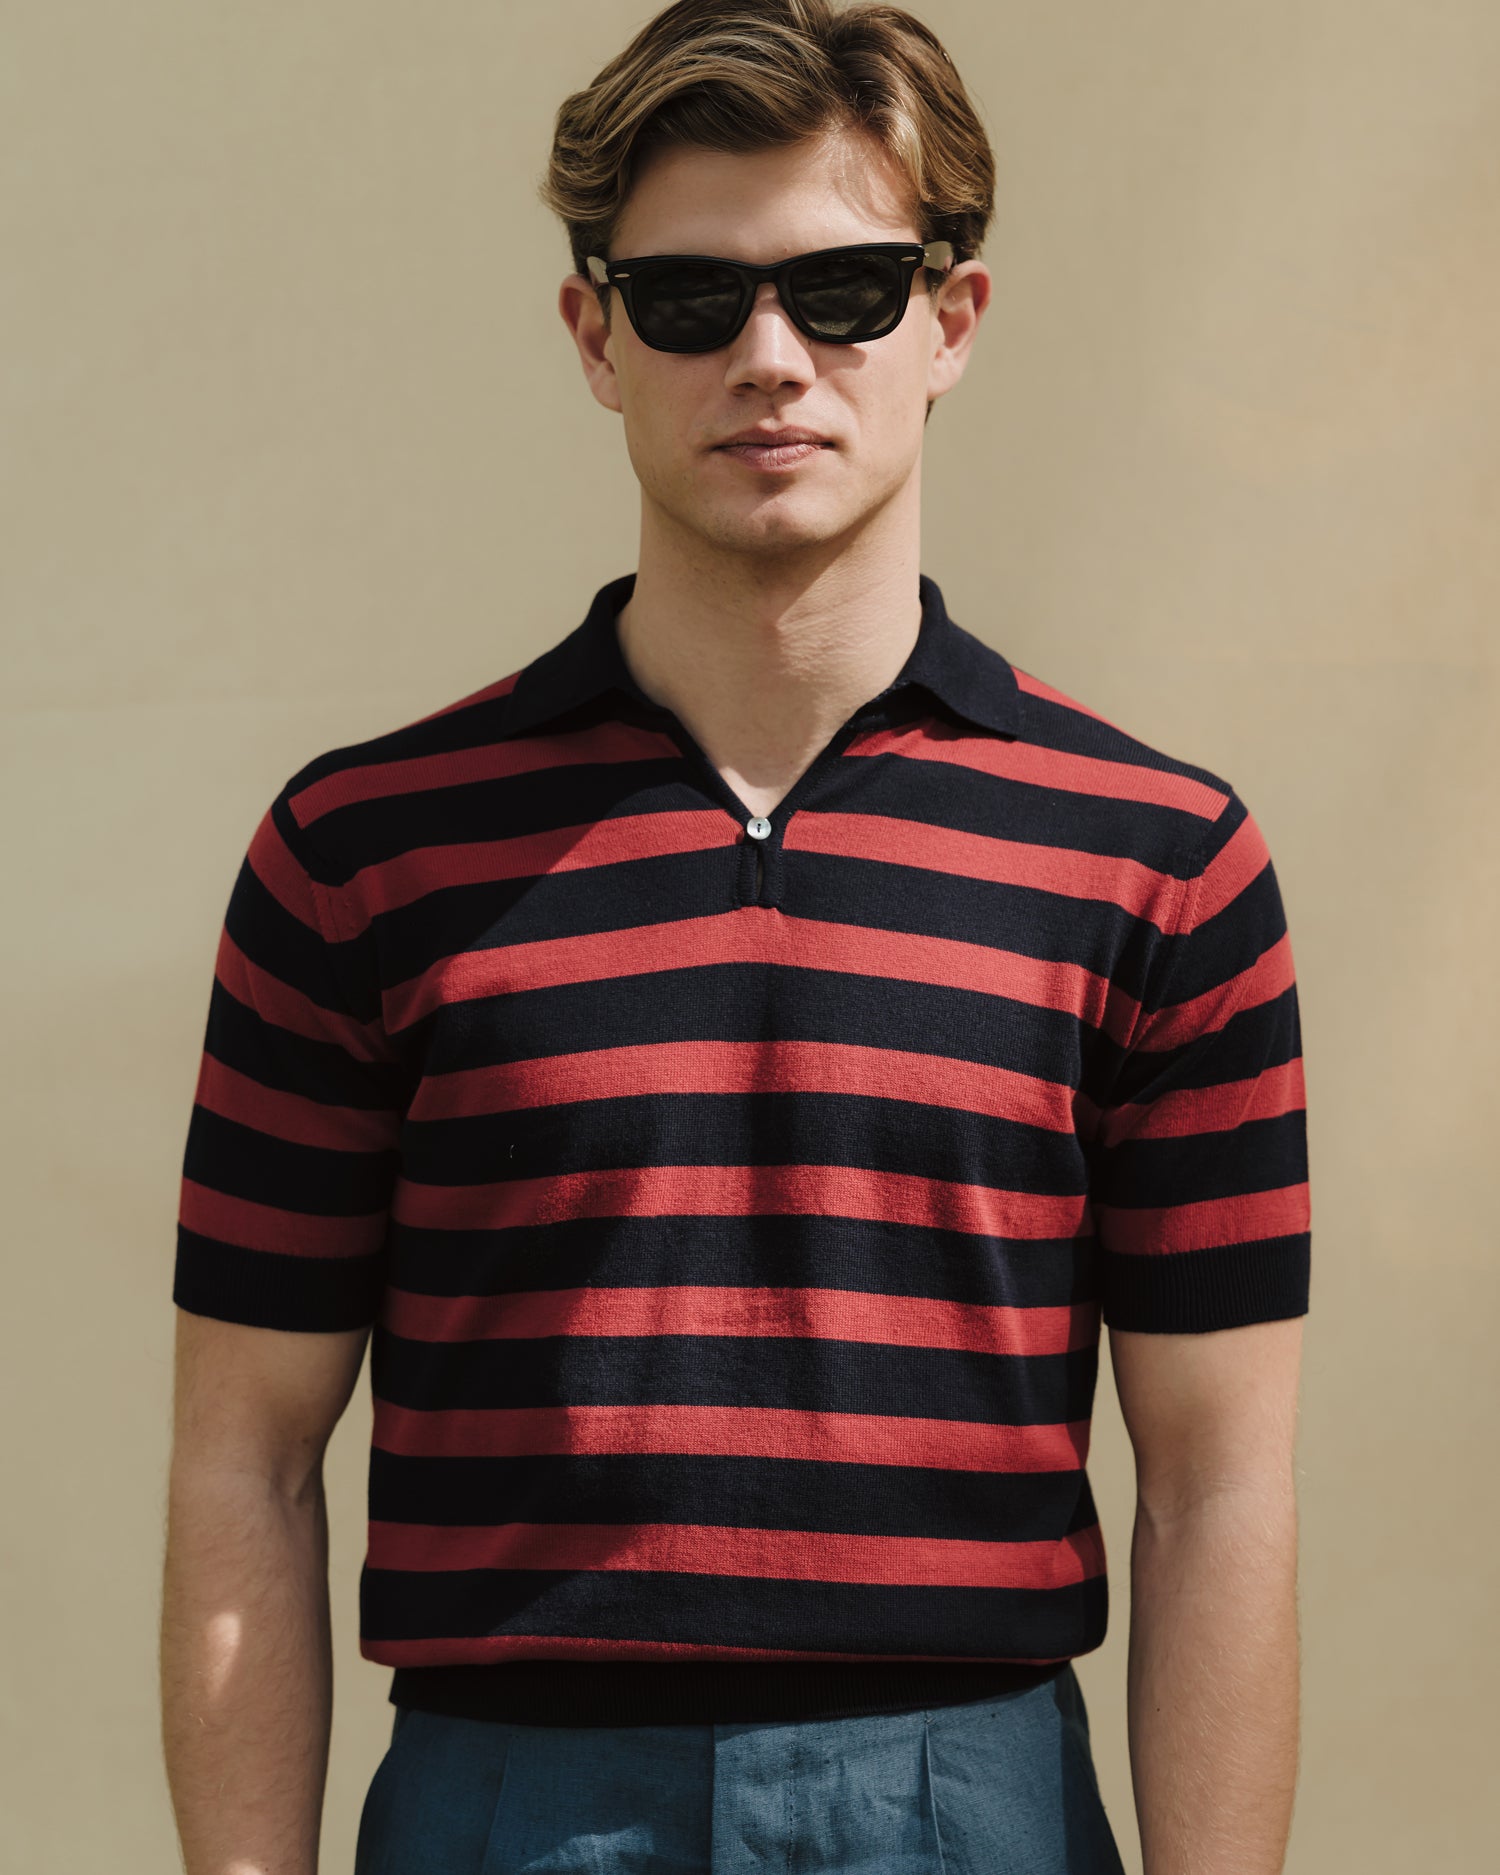 Man wearing blueberry linen trousers, navy red striped skipper polo and Wayfarer sunglasses